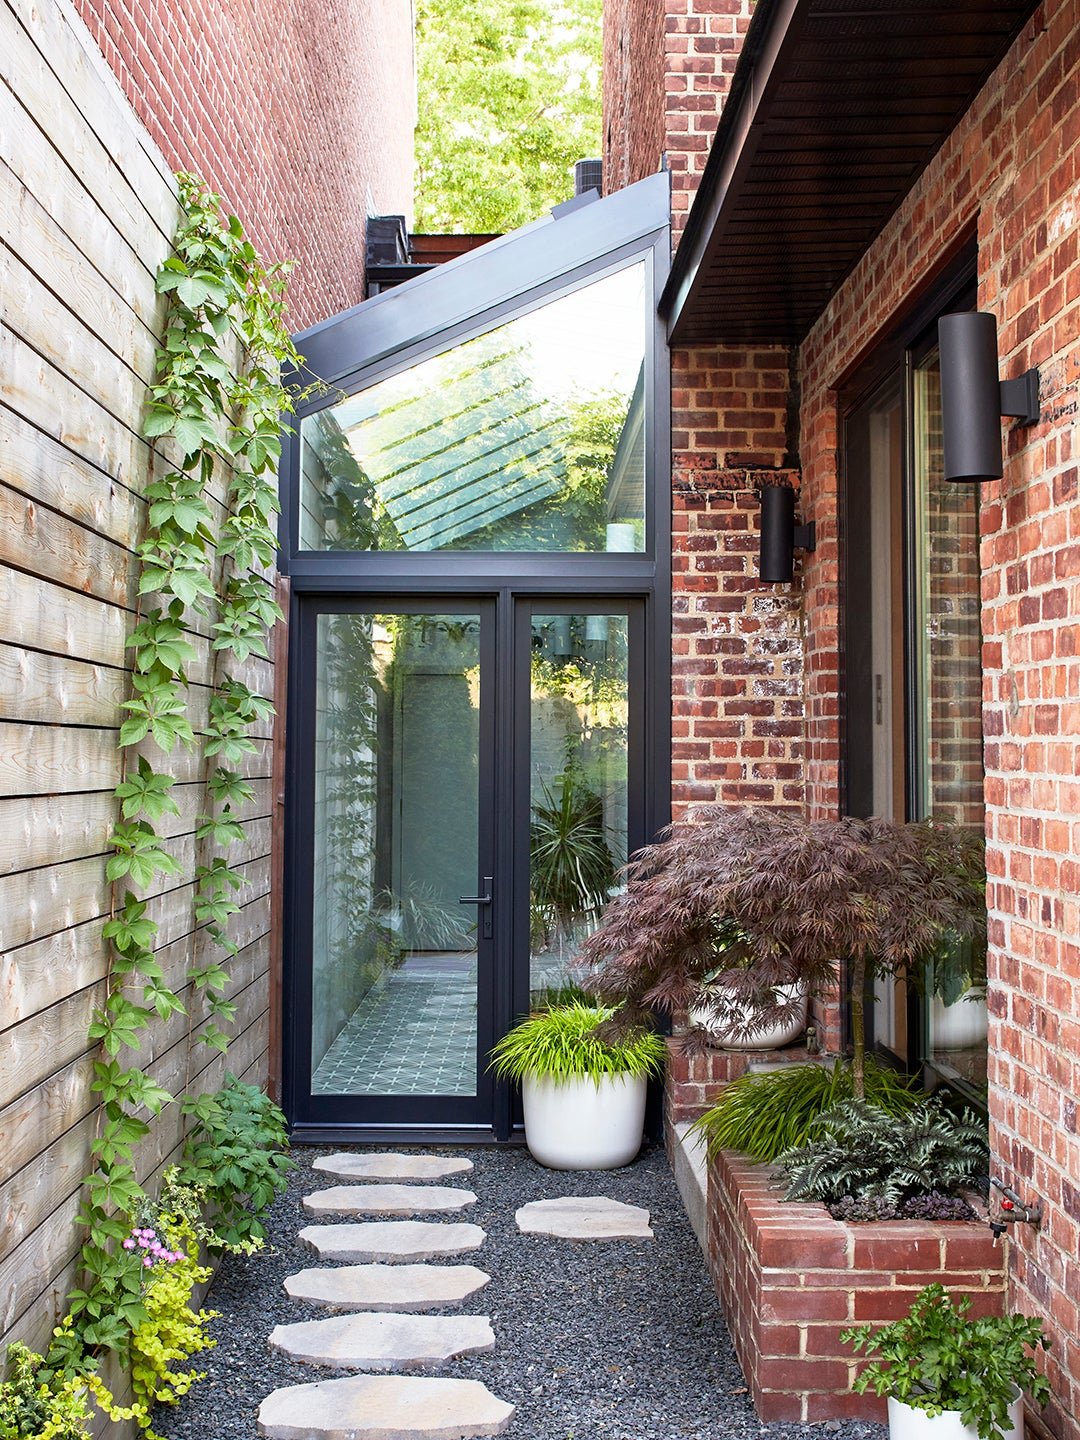 This Home’s Living Room Roof Was an Opportunity for a Dreamy Bedroom Terrace